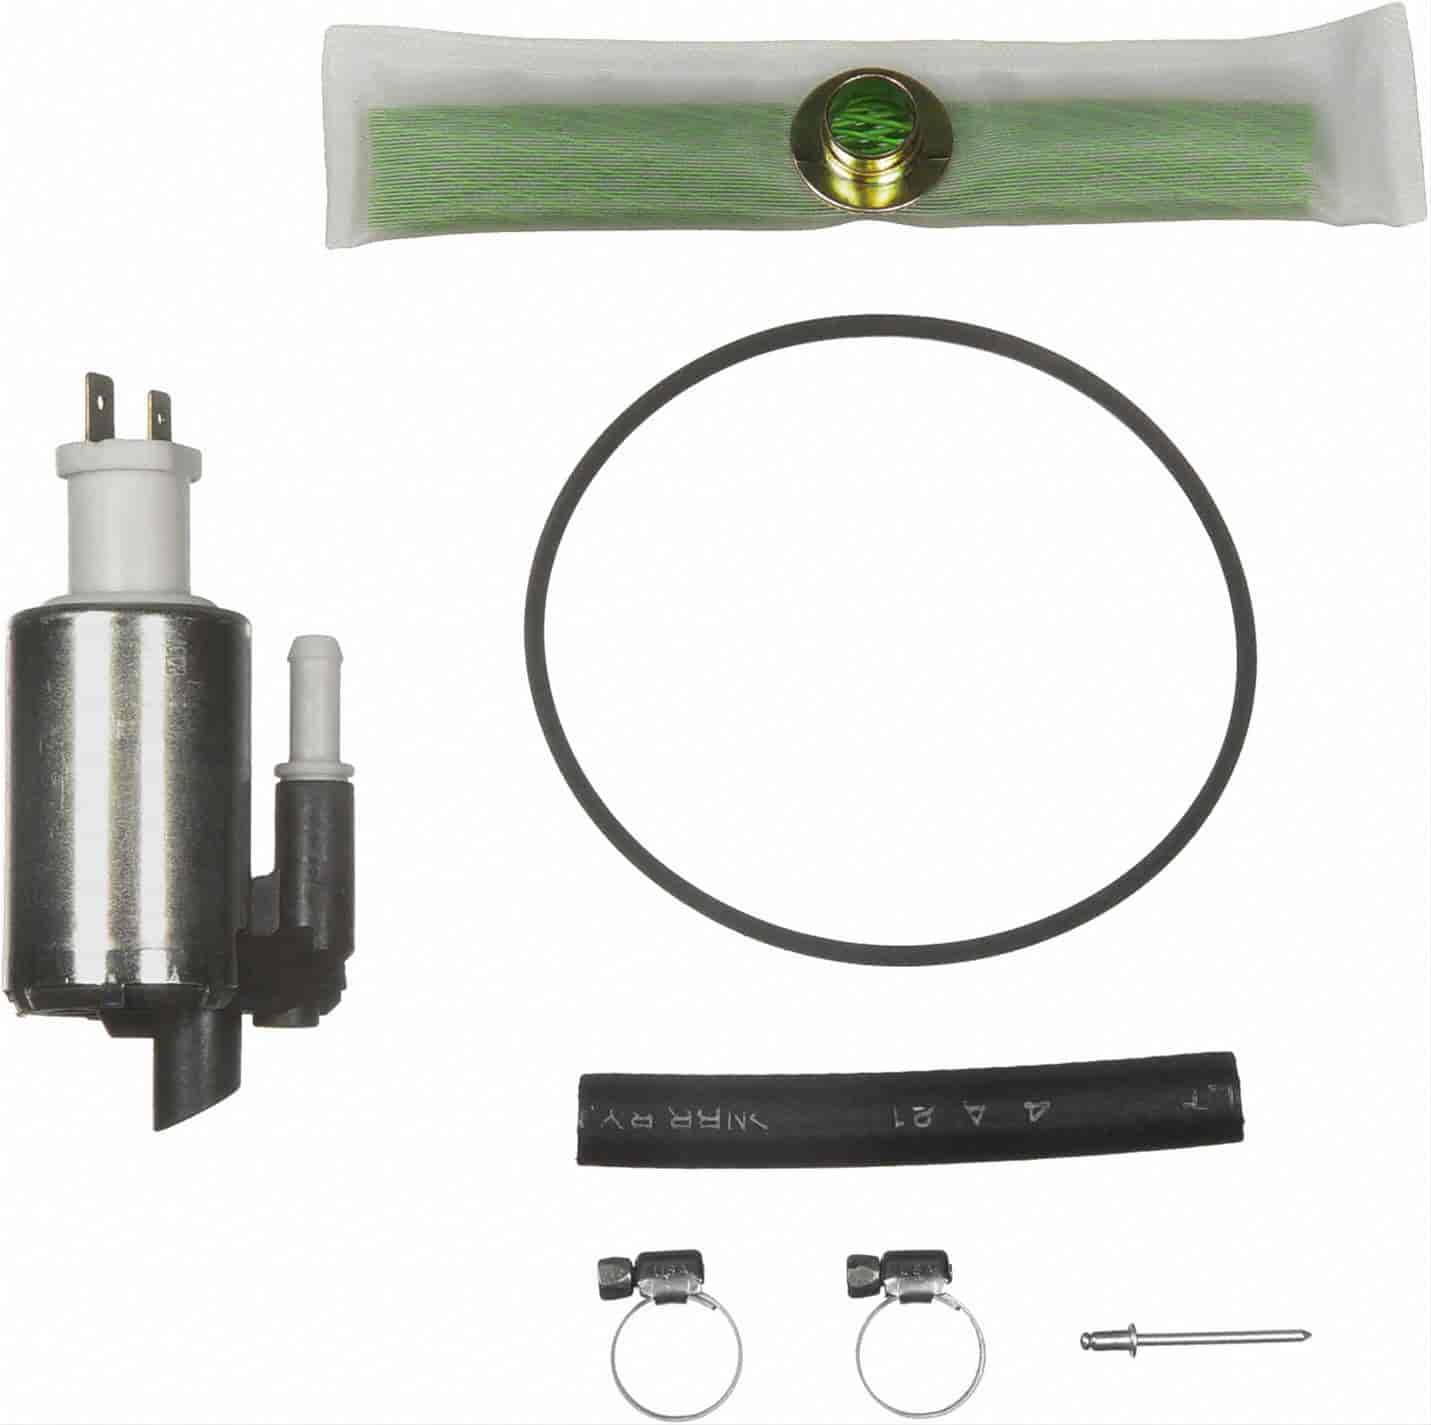 EFI In-Tank Electric Fuel Pump And Strainer Set for 1985-1990 Ford/Mercury